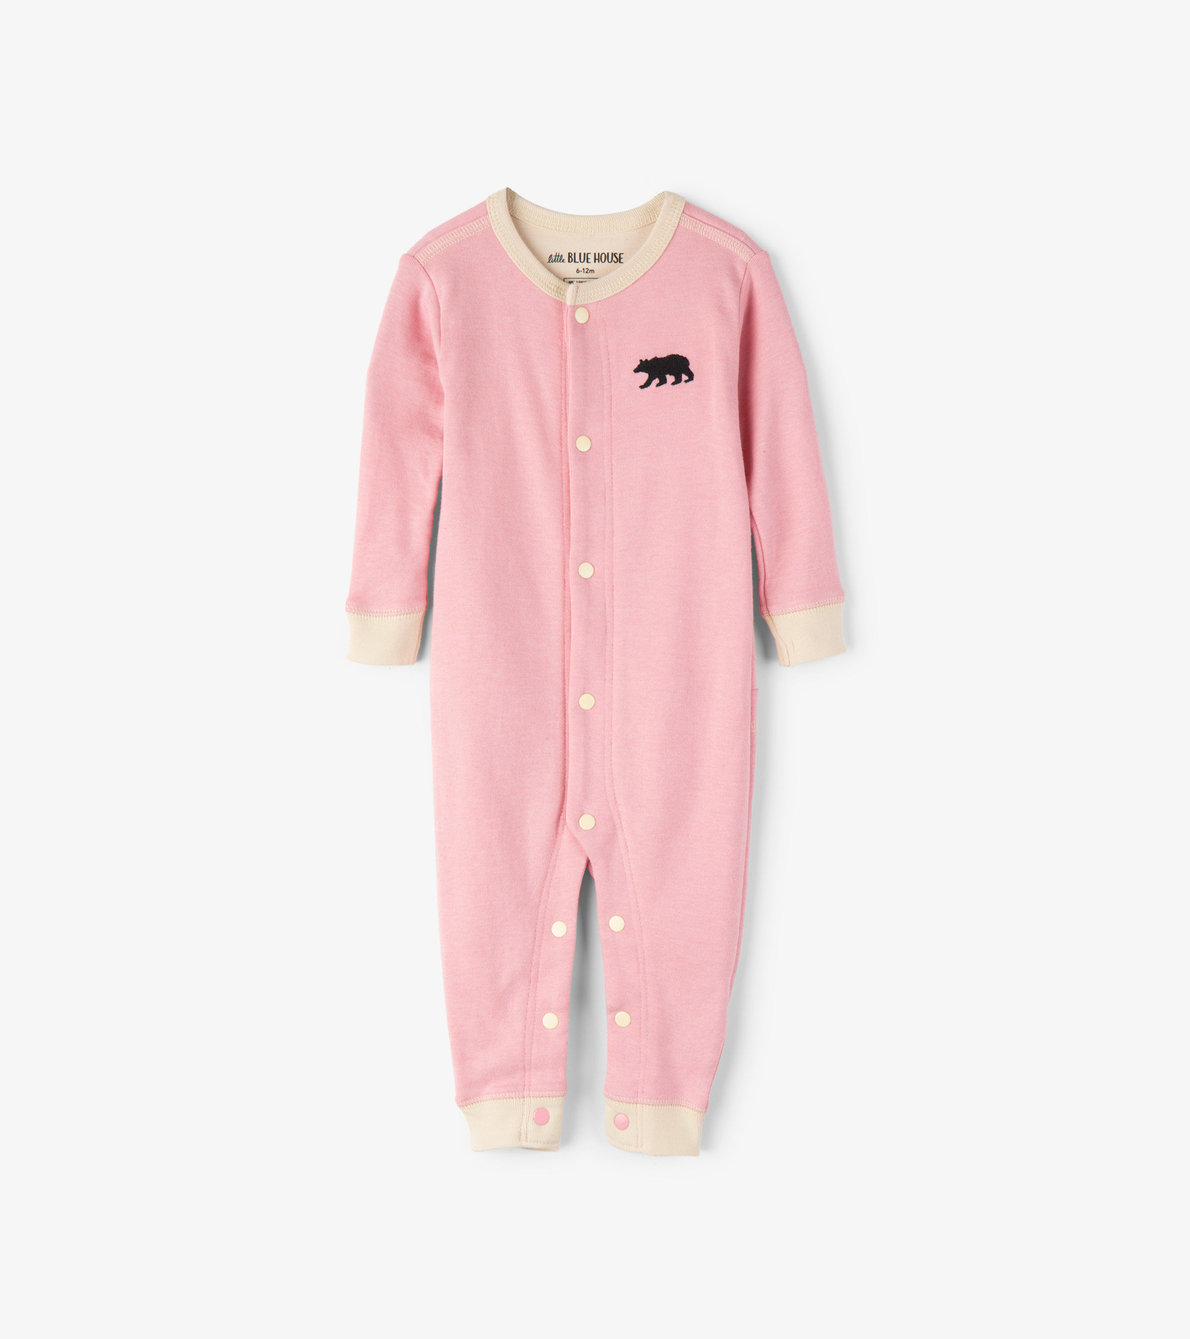 View larger image of Pink Bear Bum Baby Union Suit